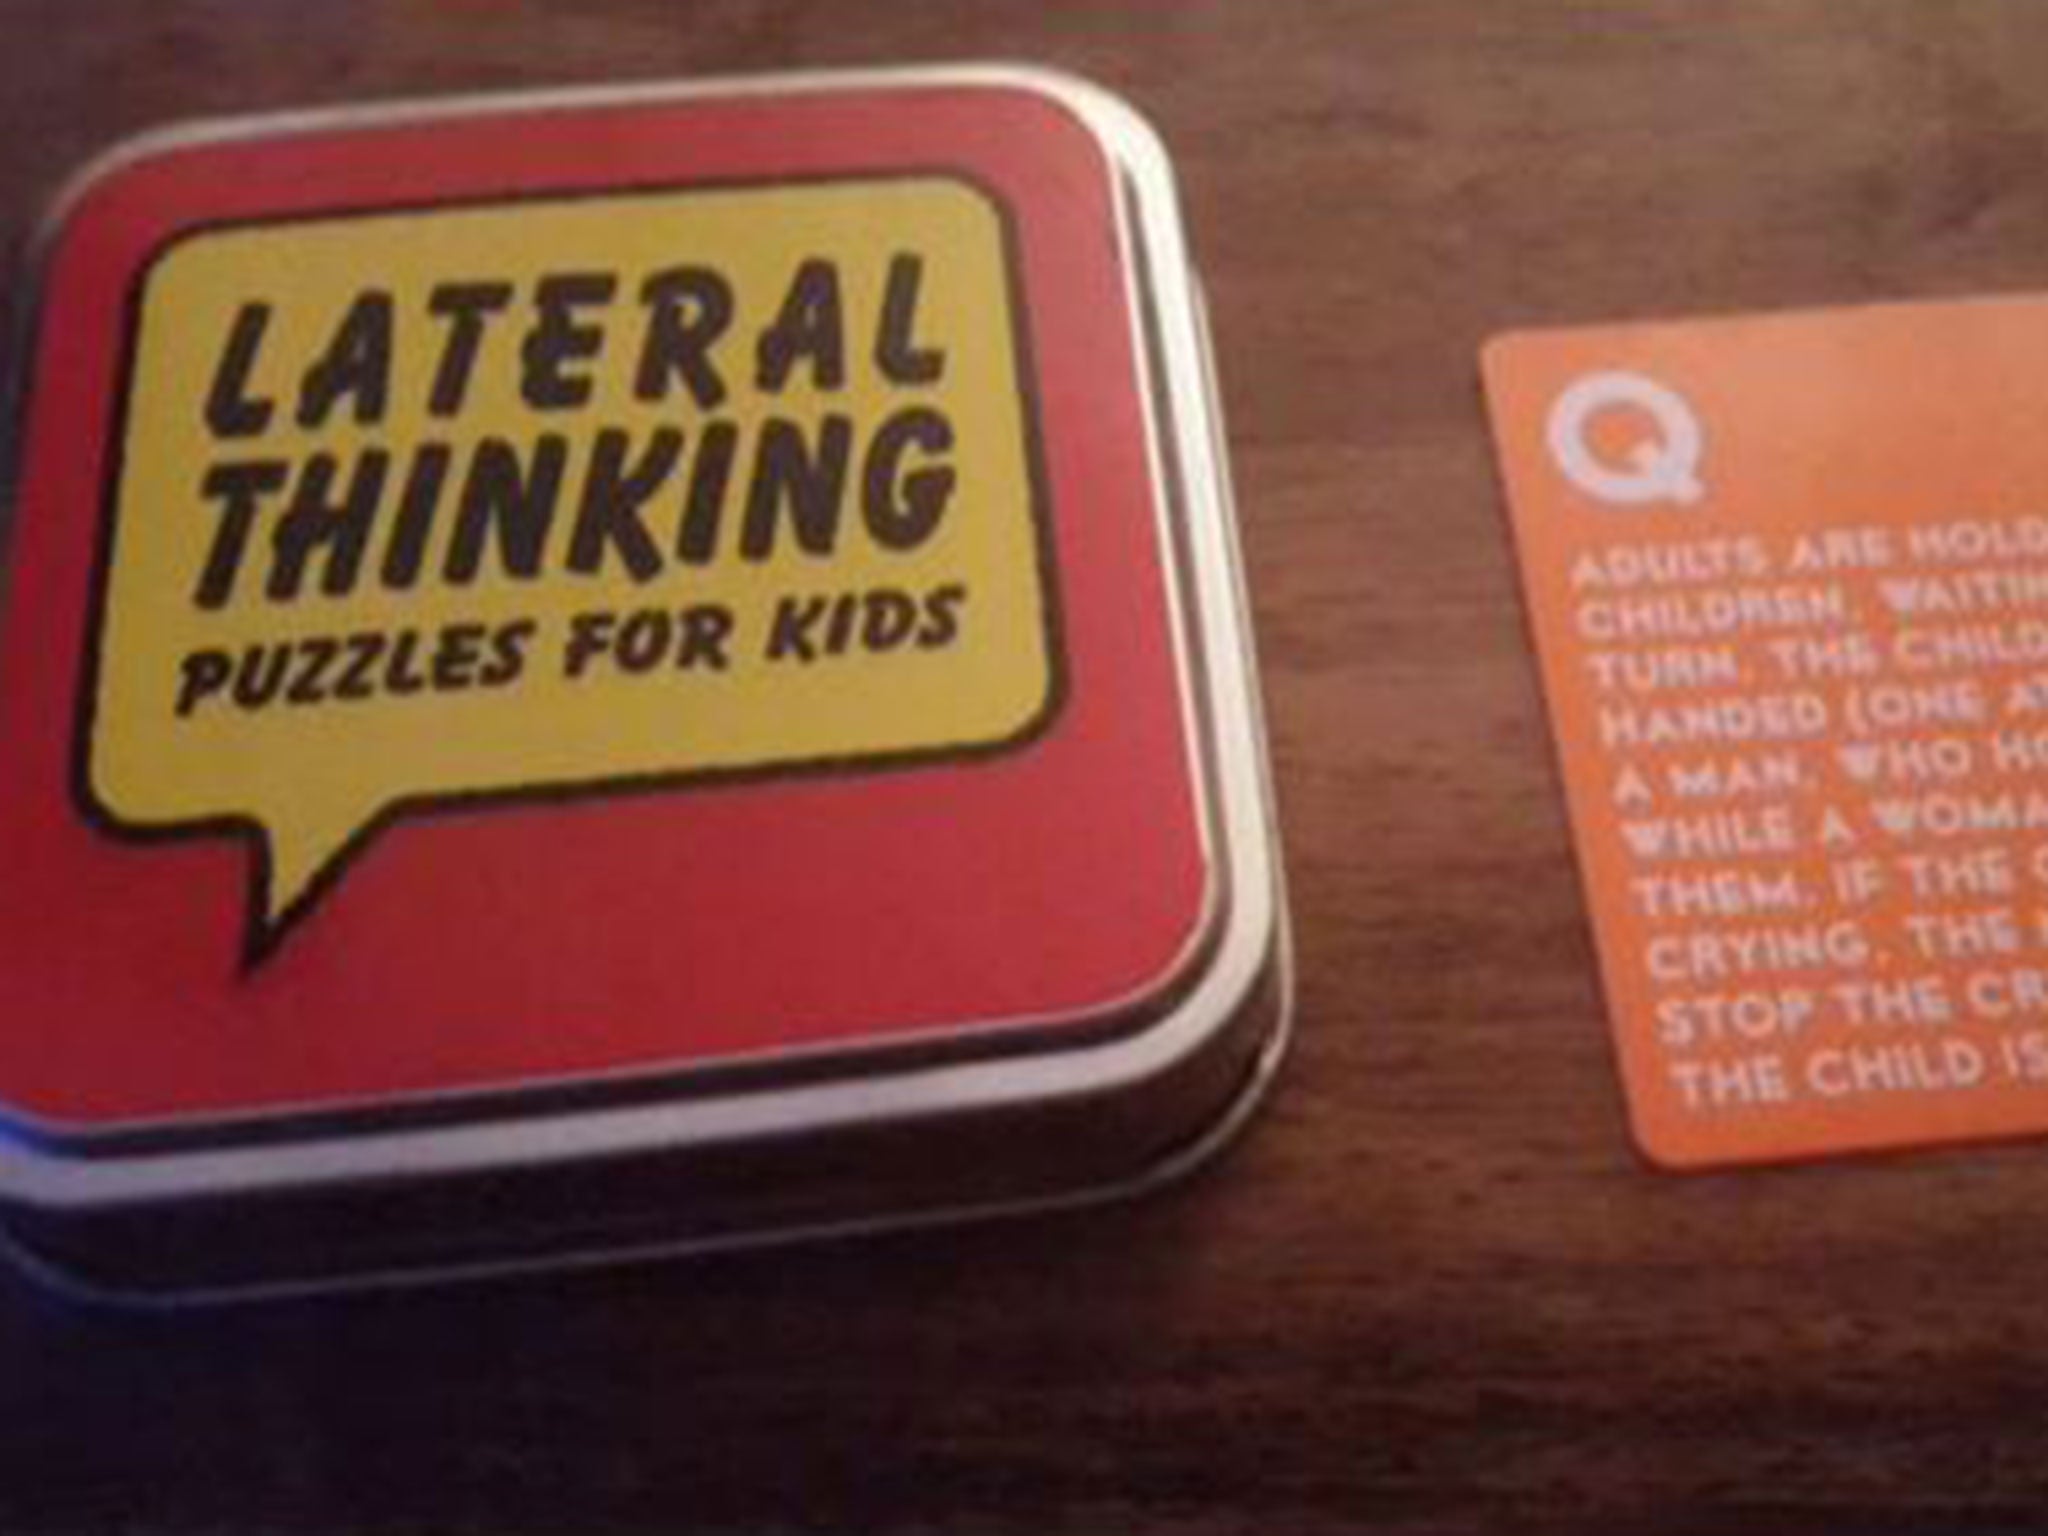 The 'Lateral Thinking Puzzles for Kids' game has sparked outrage from some customers